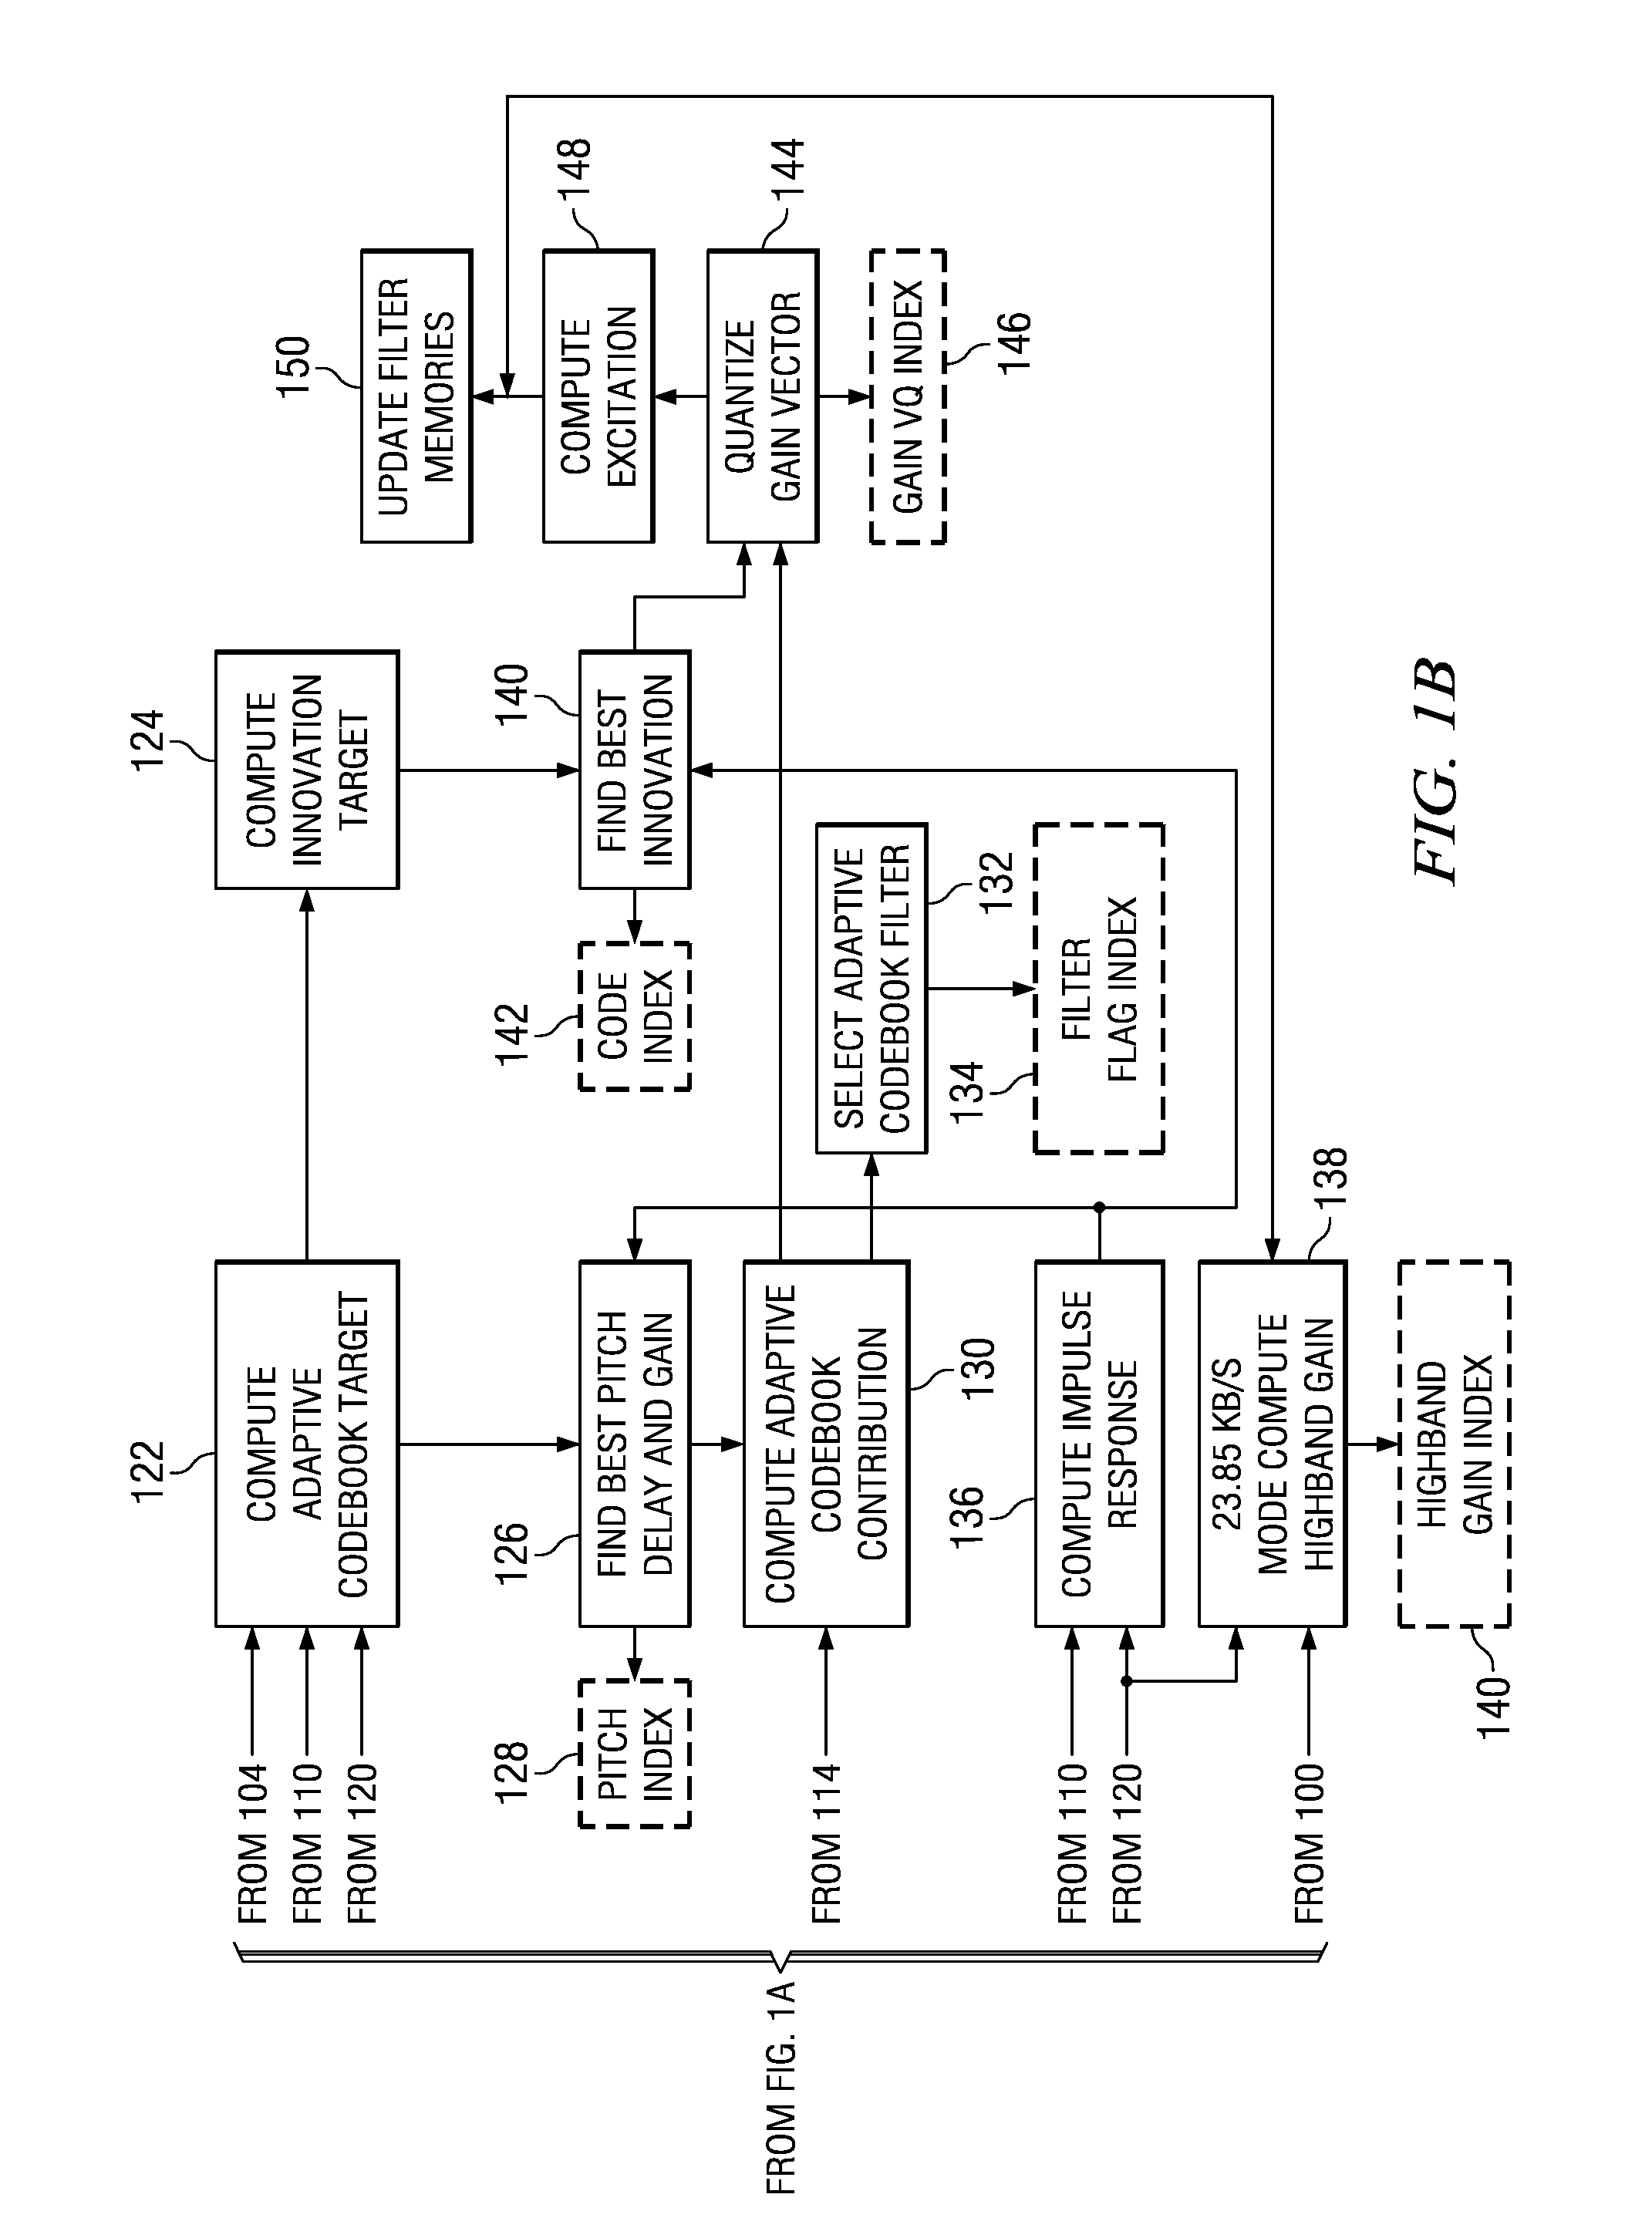 Method and system for reducing frame erasure related error propagation in predictive speech parameter coding